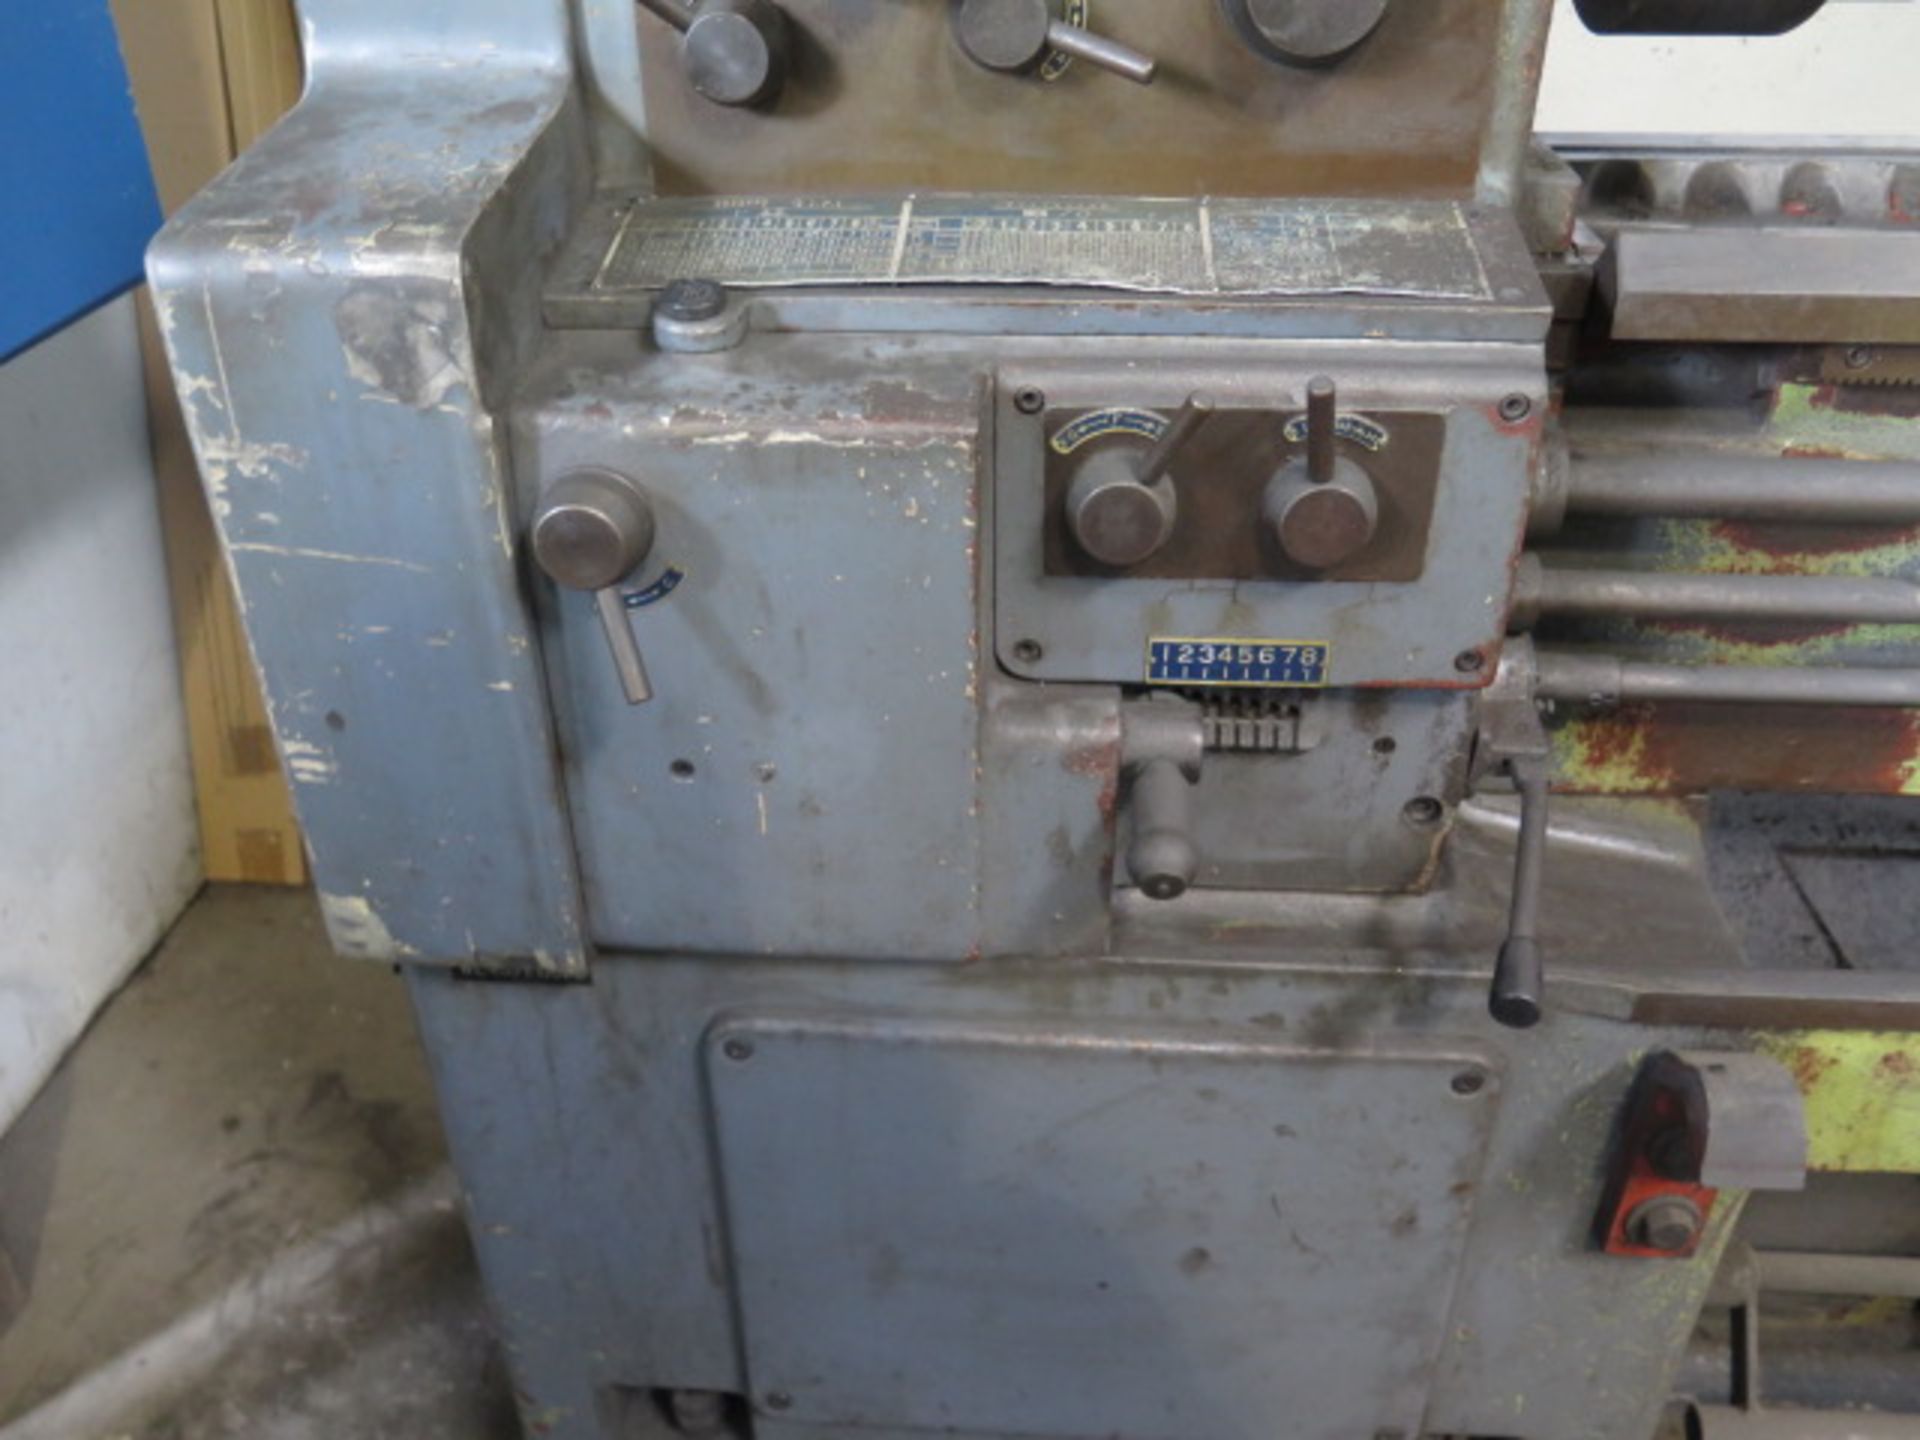 Hwa Cheon 17”GX40 17” x 40” Geared Head Gap Bed Lathe w/ 32-1800 RPM, Inch Threading, SOLD AS IS - Image 6 of 16